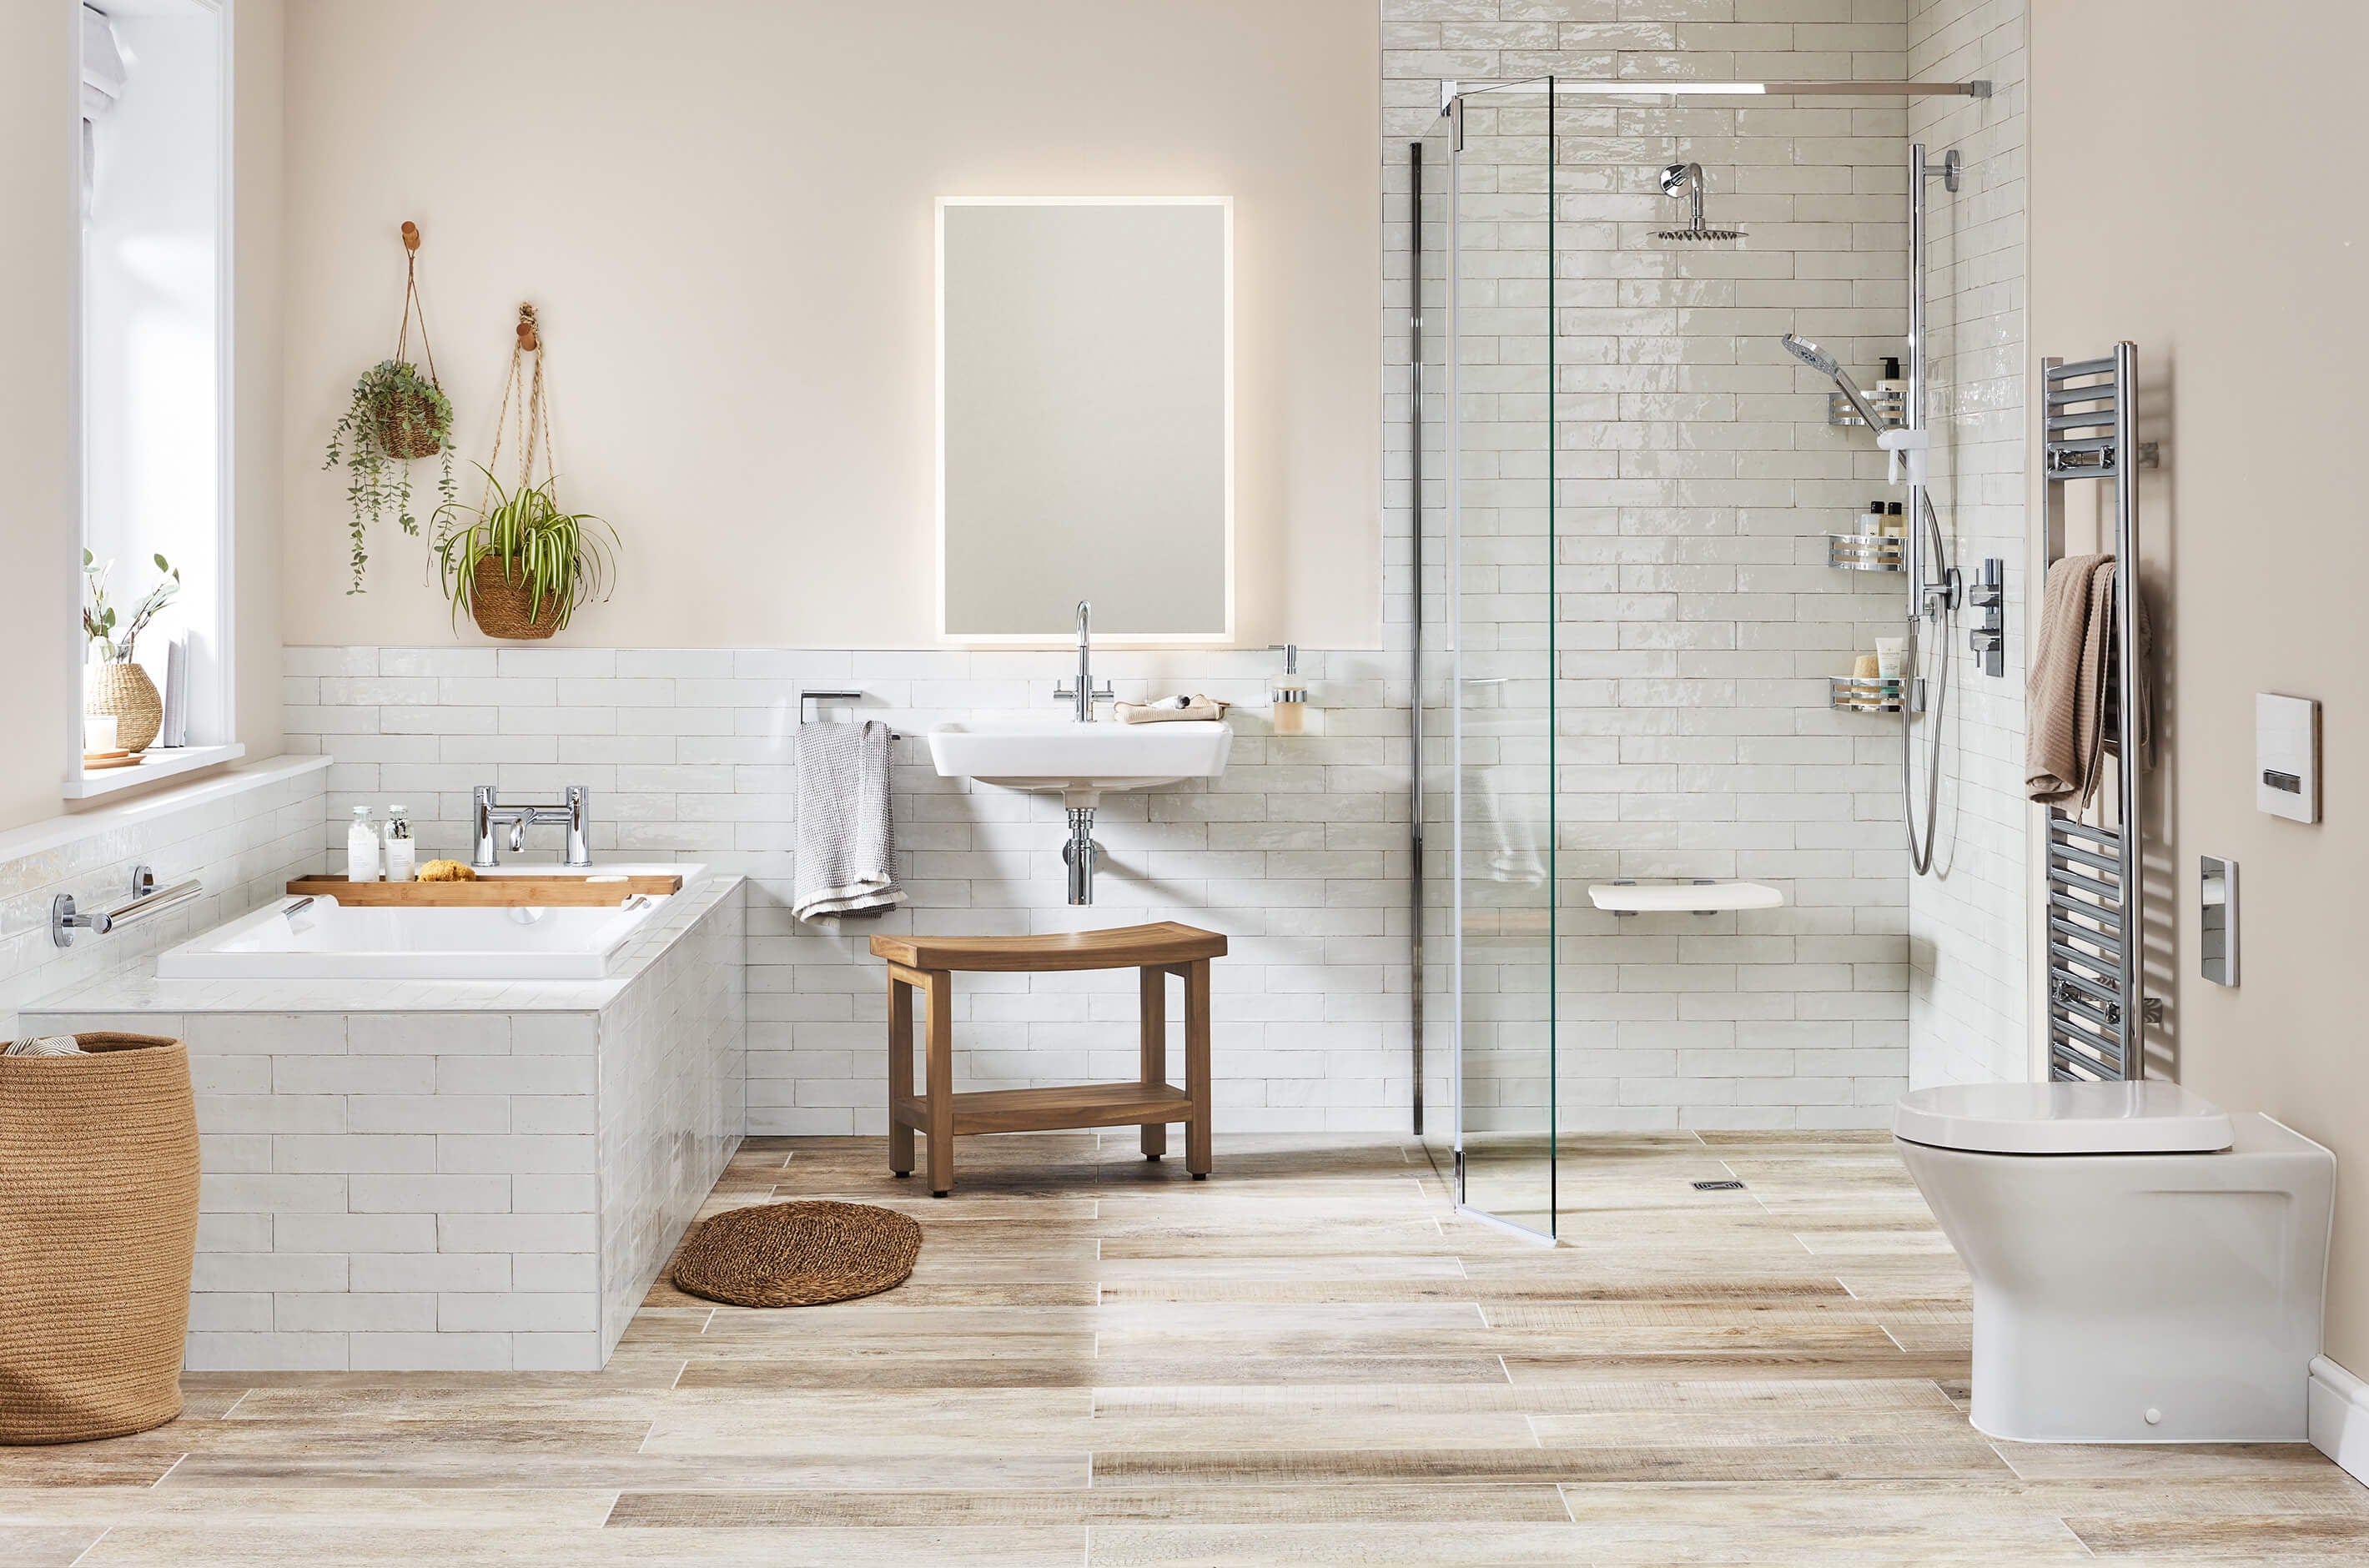 Neutral toned Fine & Able accessible bathroom with level access shower enclosure, wall mounted shower seat, and basin with wooden bench below.